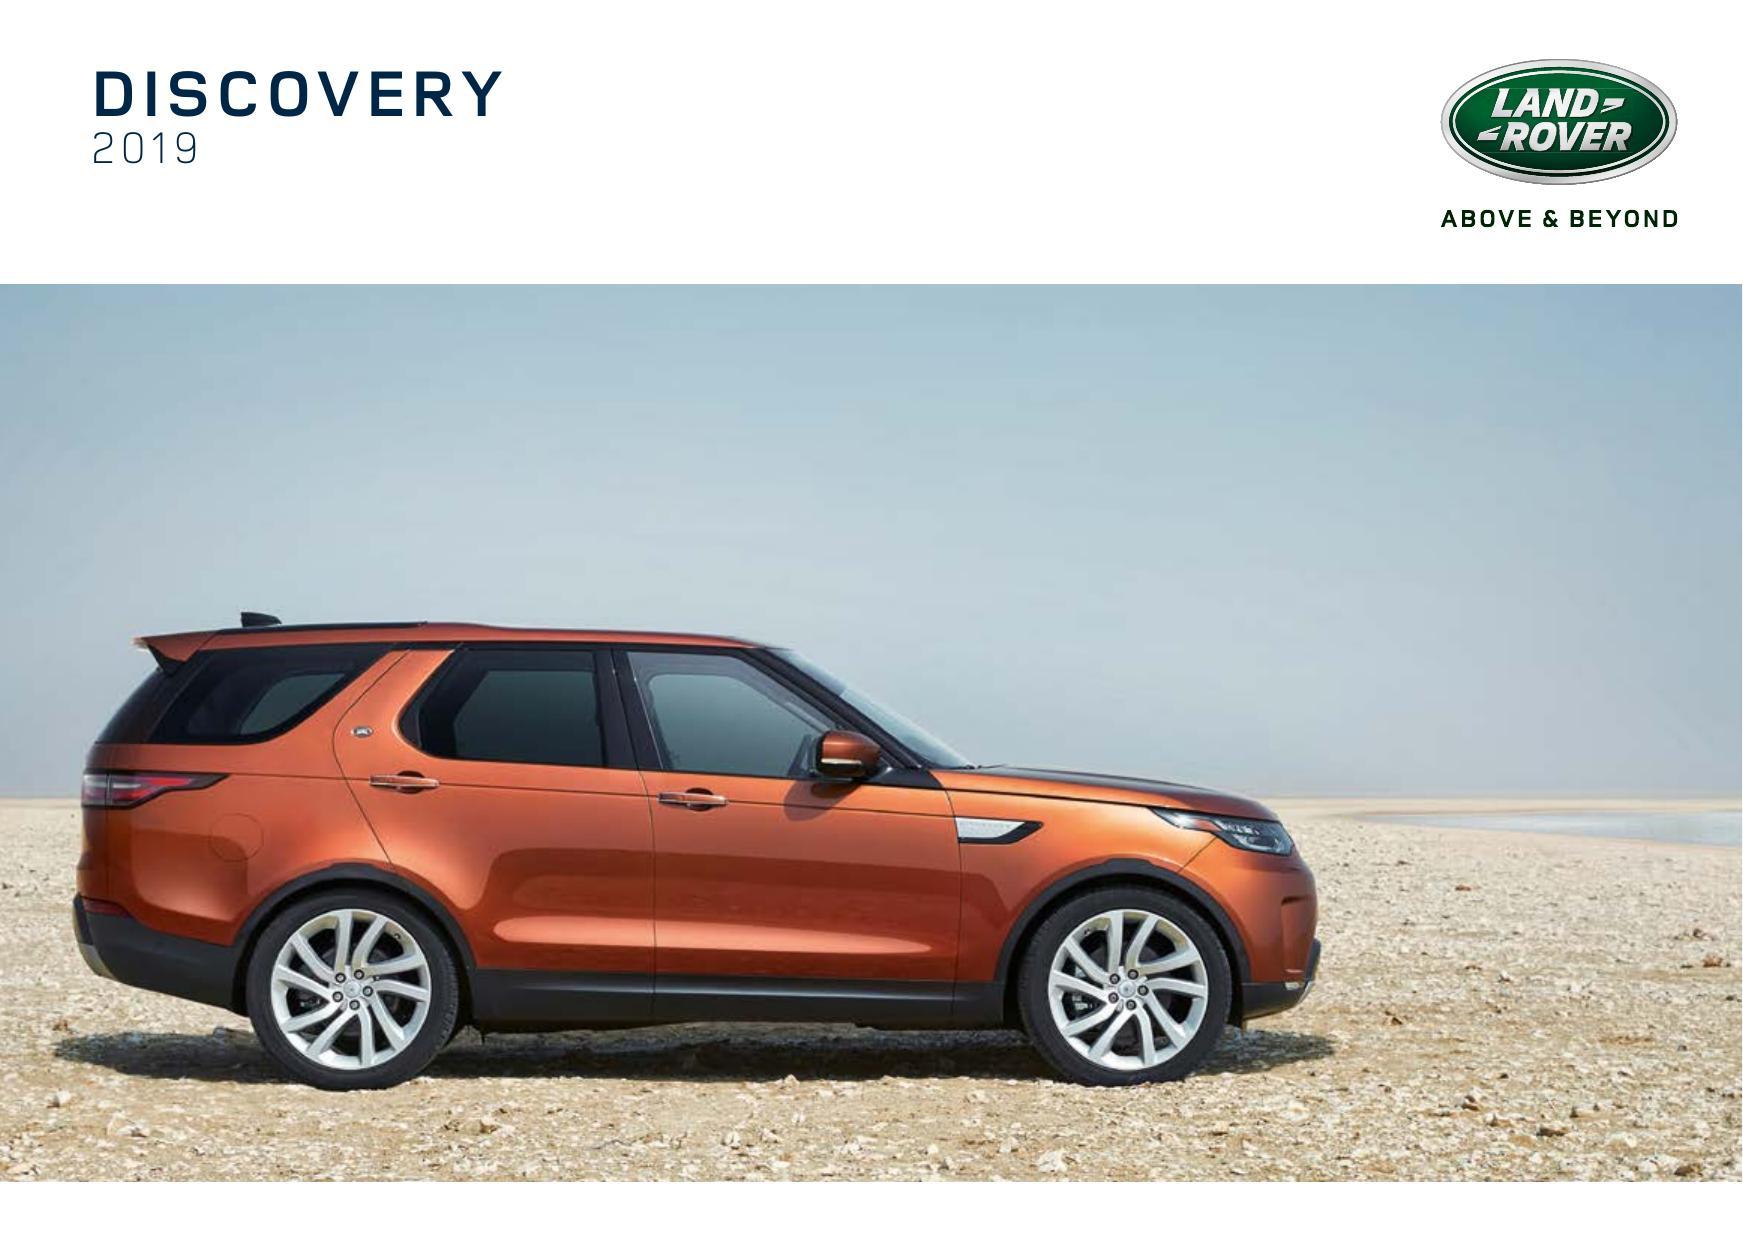 2019-land-rover-discovery-owners-manual.pdf